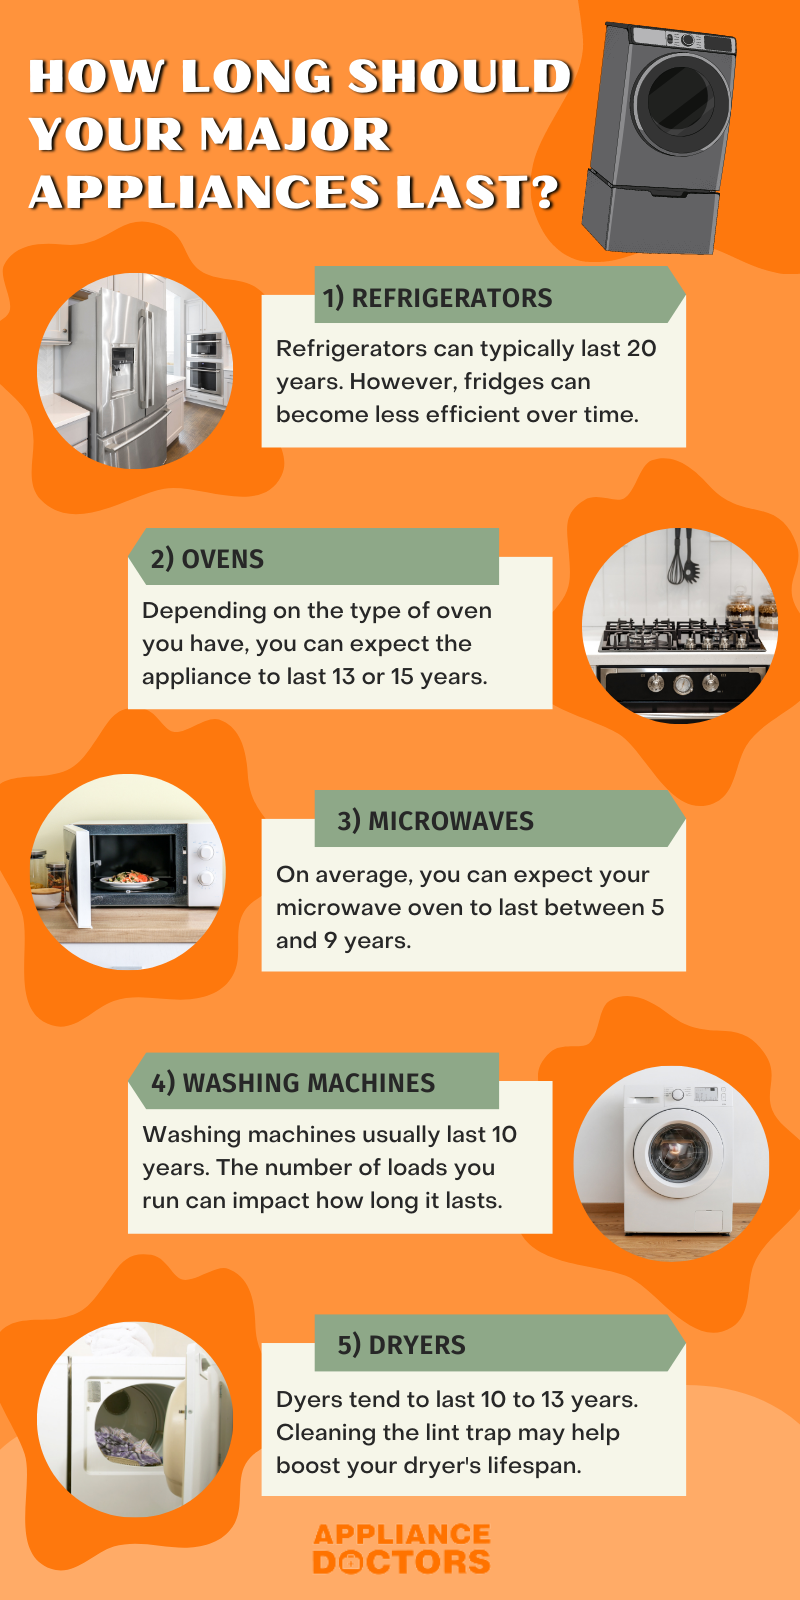 2) ovens
HOW LONG SHOULD YOUR MAJOR APPLIANCES LAST?
1) refrigerators
3) microwaves
5) dryers
4) washing machines
Refrigerators can typically last 20 years. However, fridges can become less efficient over time.
Depending on the type of oven you have, you can expect the appliance to last 13 or 15 years.
Washing machines usually last 10 years. The number of loads you run can impact how long it lasts.
Dyers tend to last 10 to 13 years. Cleaning the lint trap may help boost your dryer's lifespan.
On average, you can expect your microwave oven to last between 5 and 9 years.